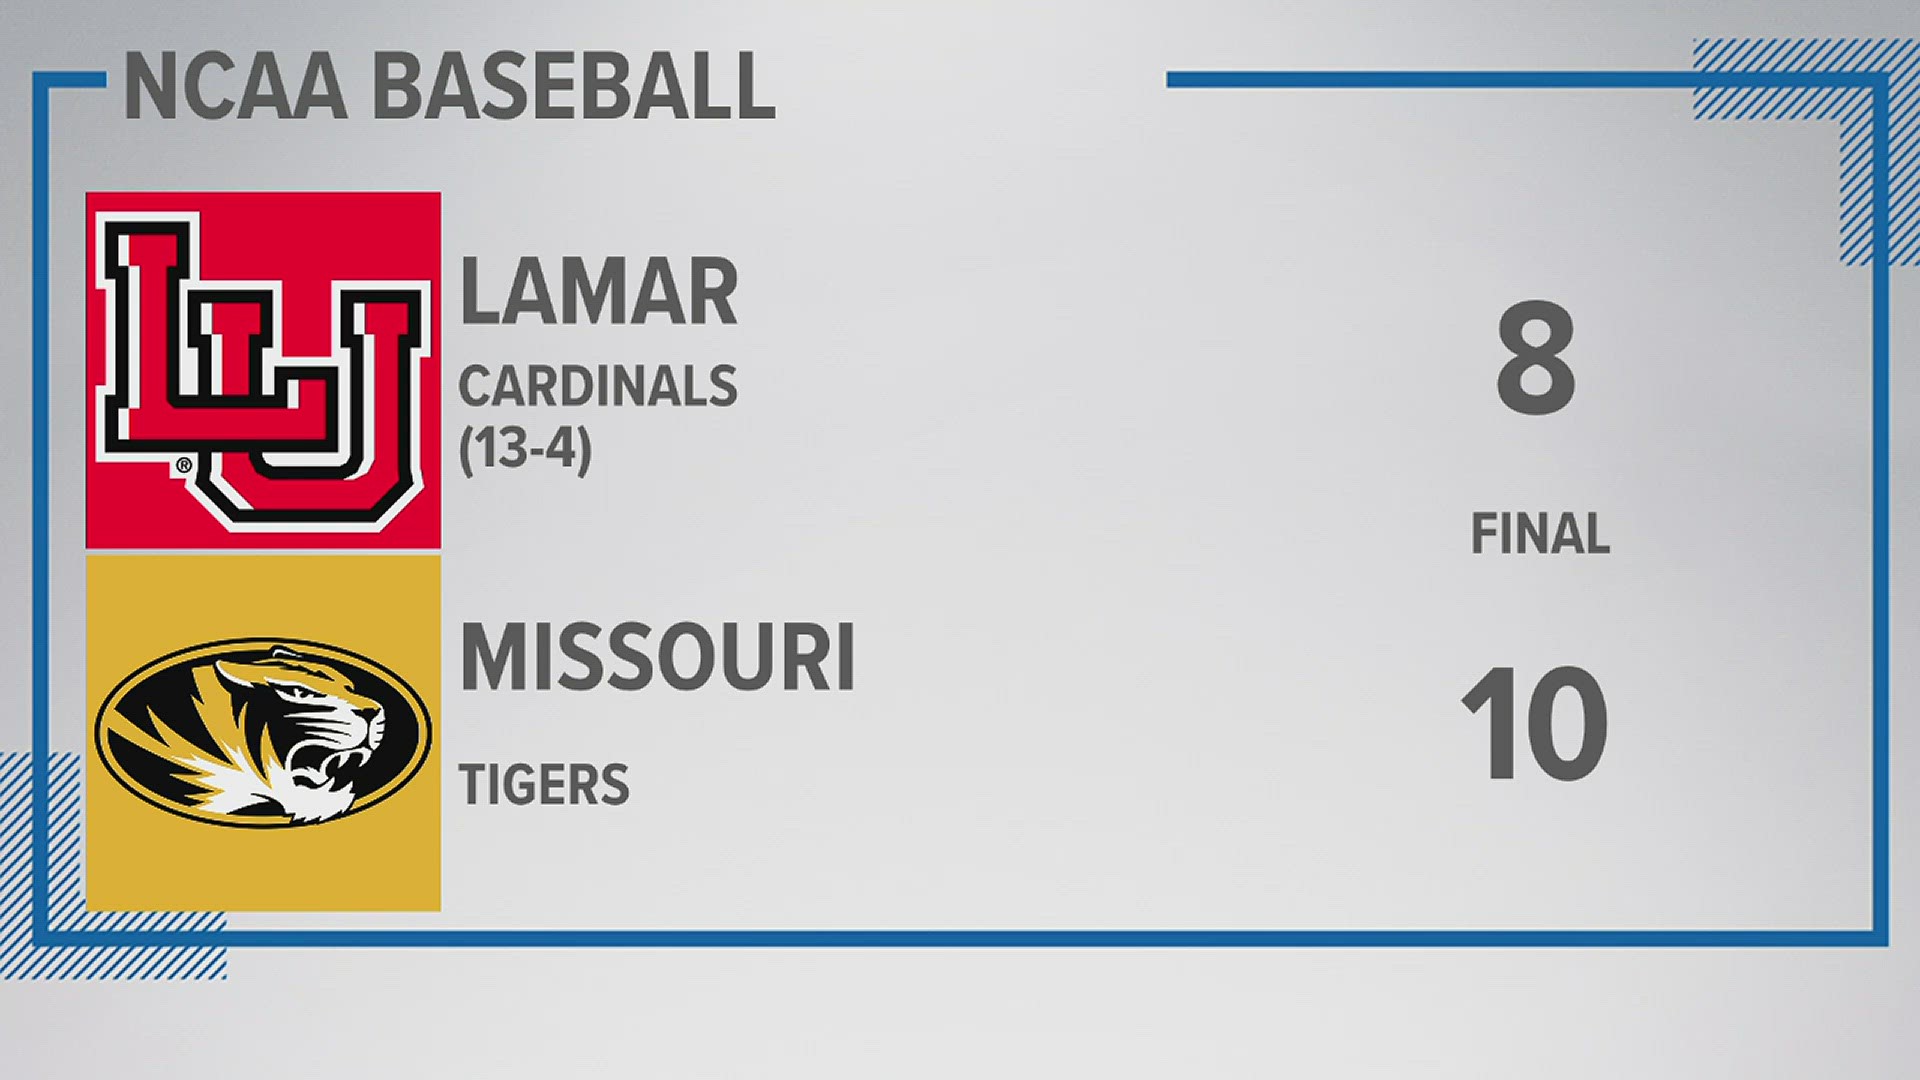 The Cardinals (13-4) scored their eight runs on 10 hits with just one error, while Mizzou scored 10 runs on 11 hits and an error.